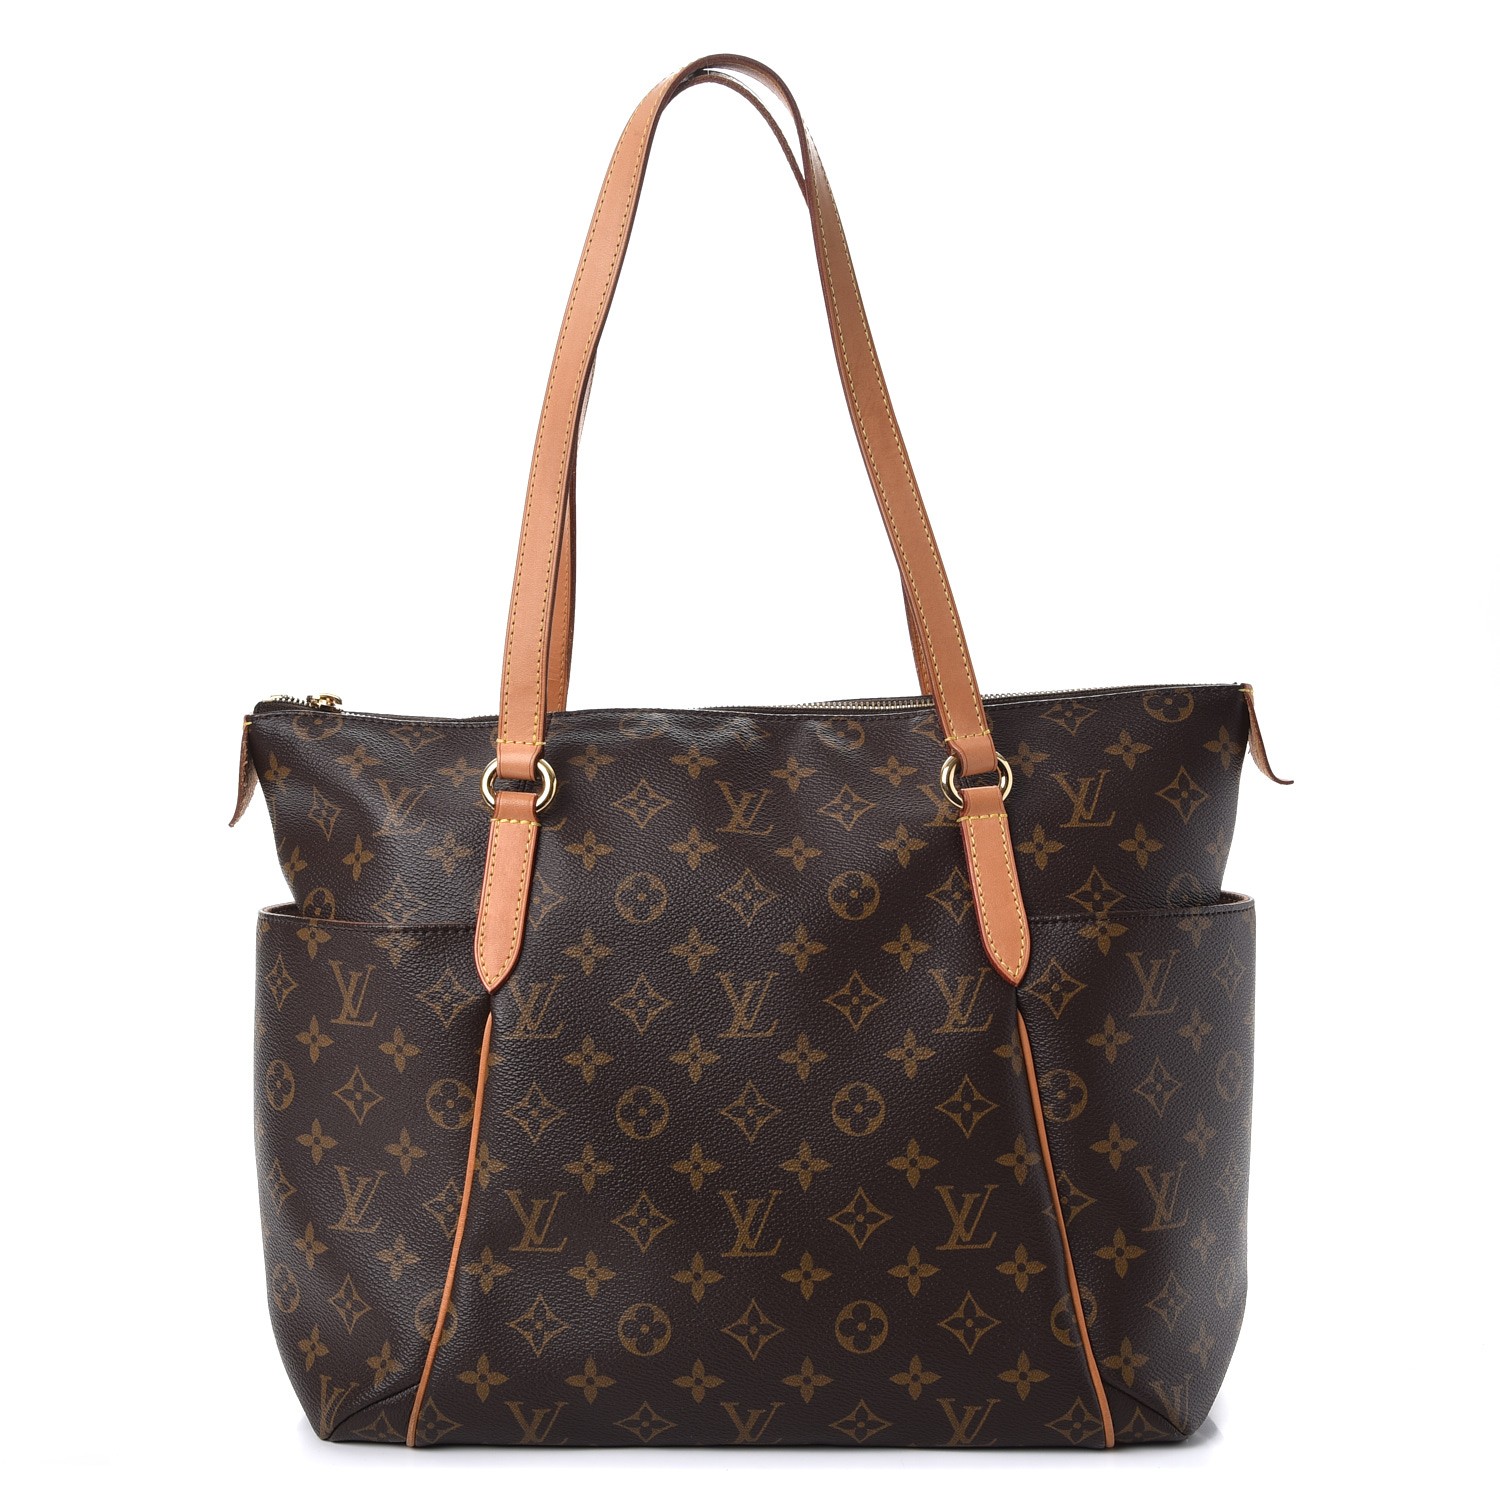 BREAKING NEWS: Louis Vuitton to Discontinue All 3 Sizes of its